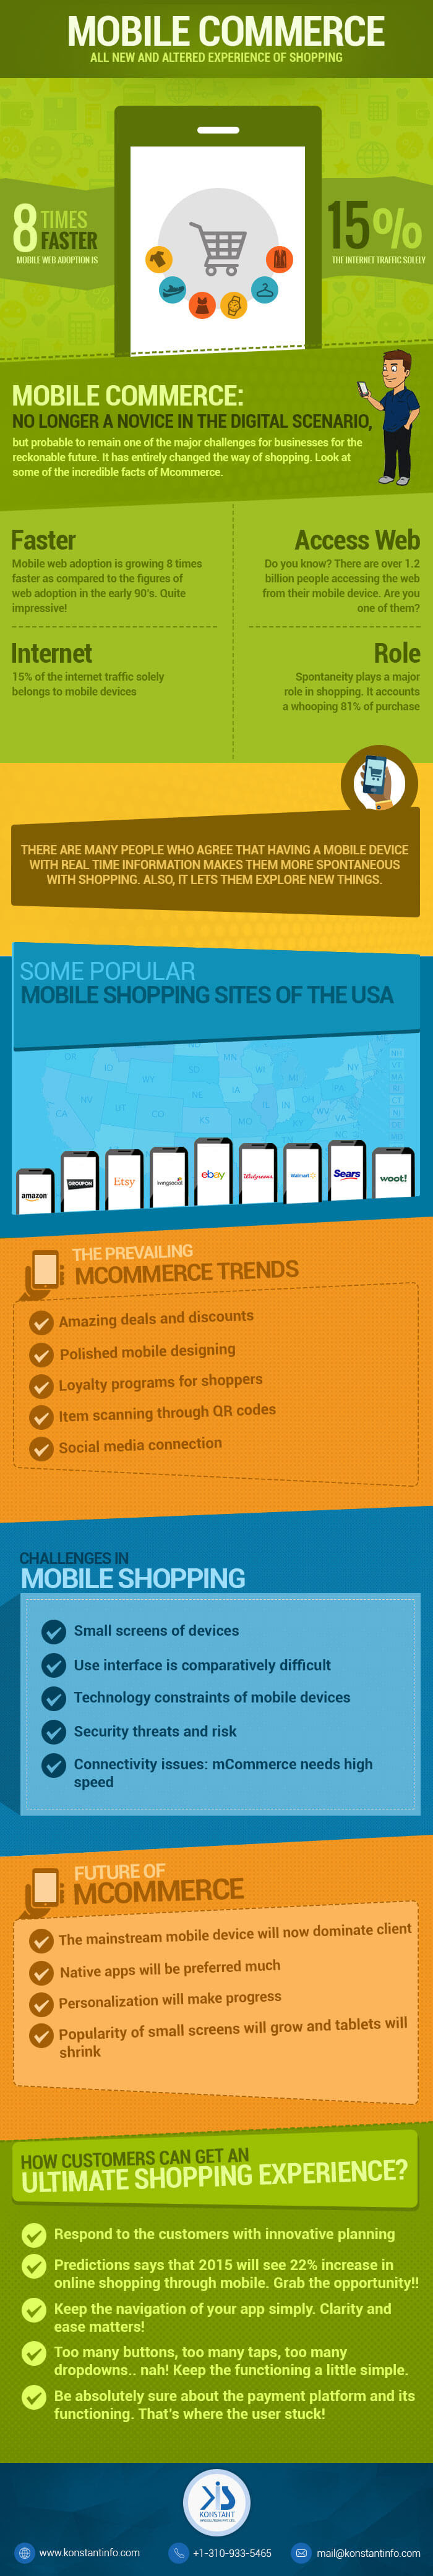 mCommerce Development - An Altered Online Shopping Experience 2015